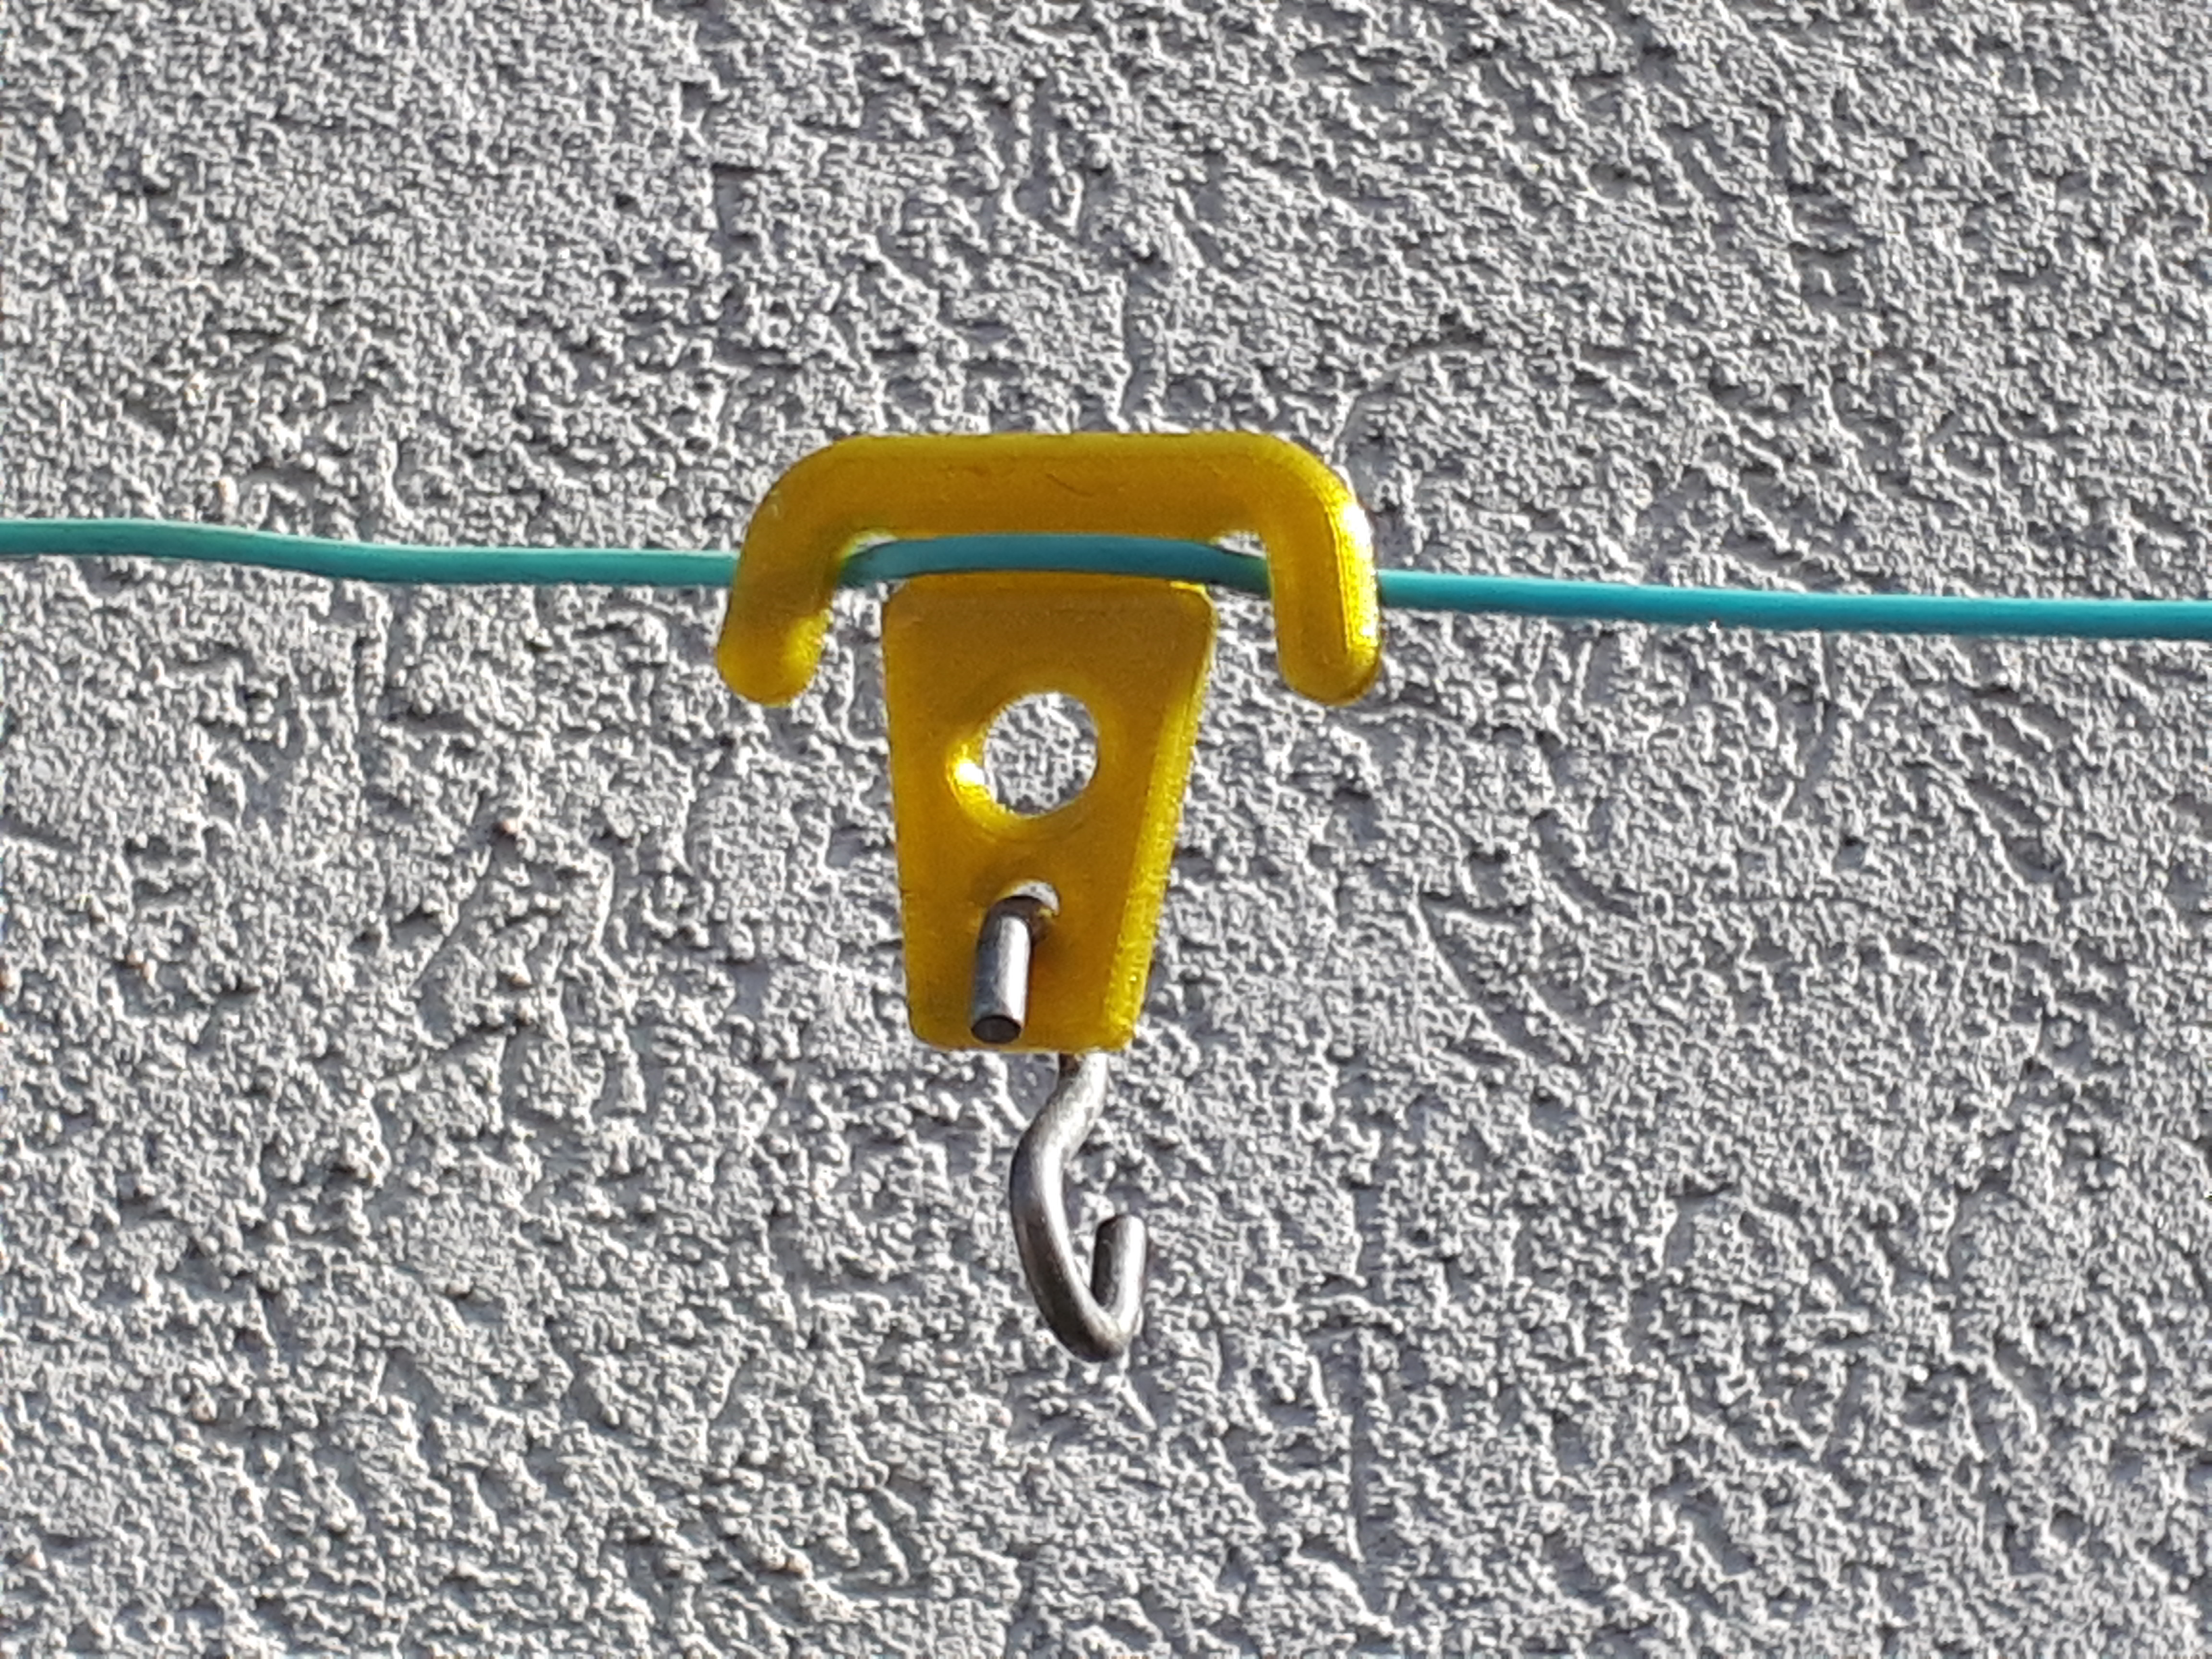 Clothes line adapter